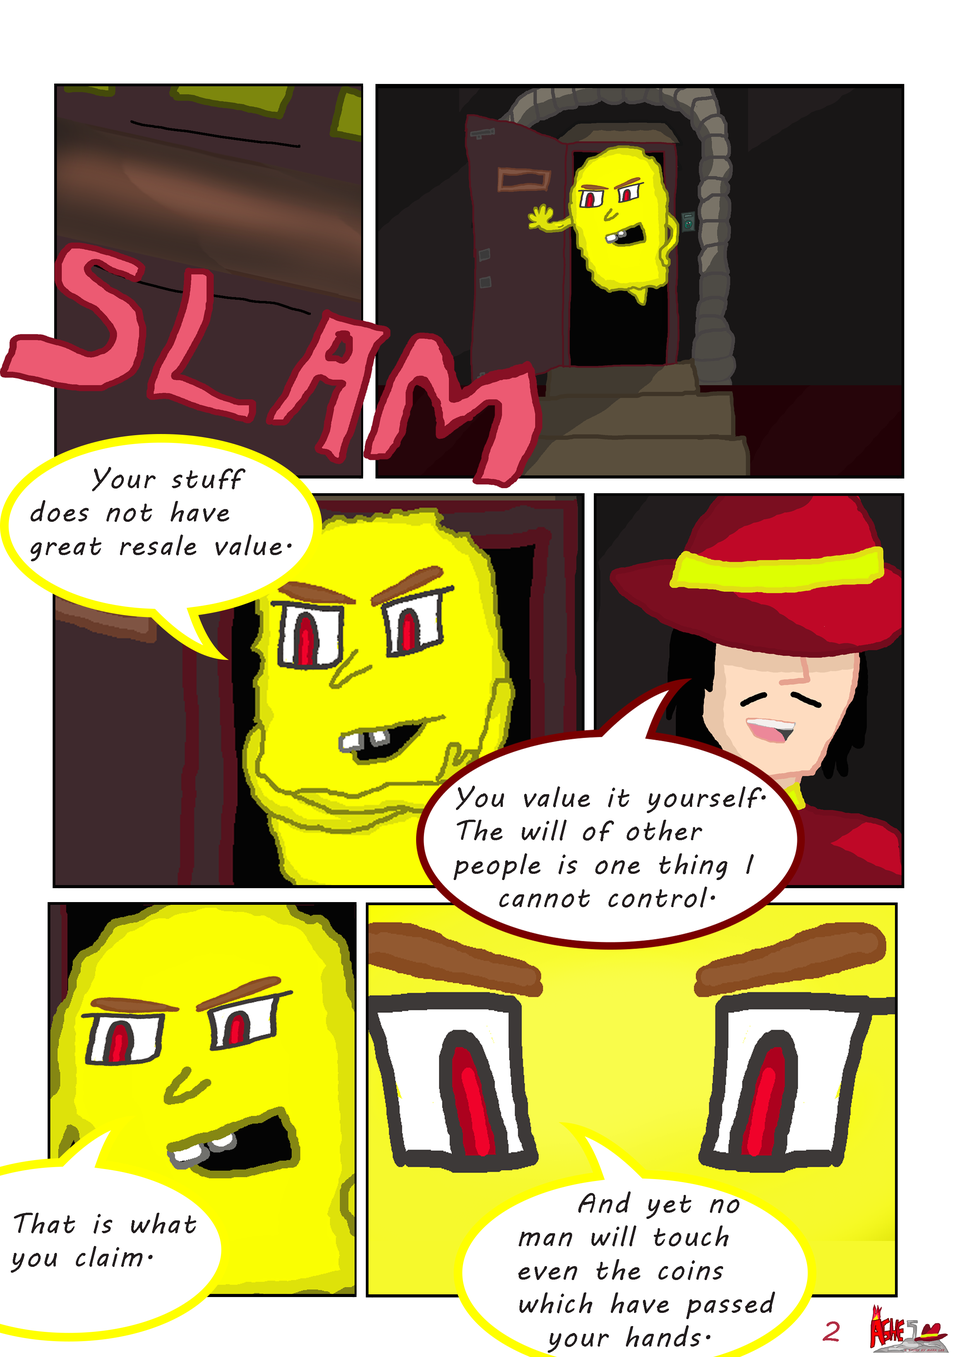 Ashes - The Coins Which Have Passed Your Hands - Comic #2